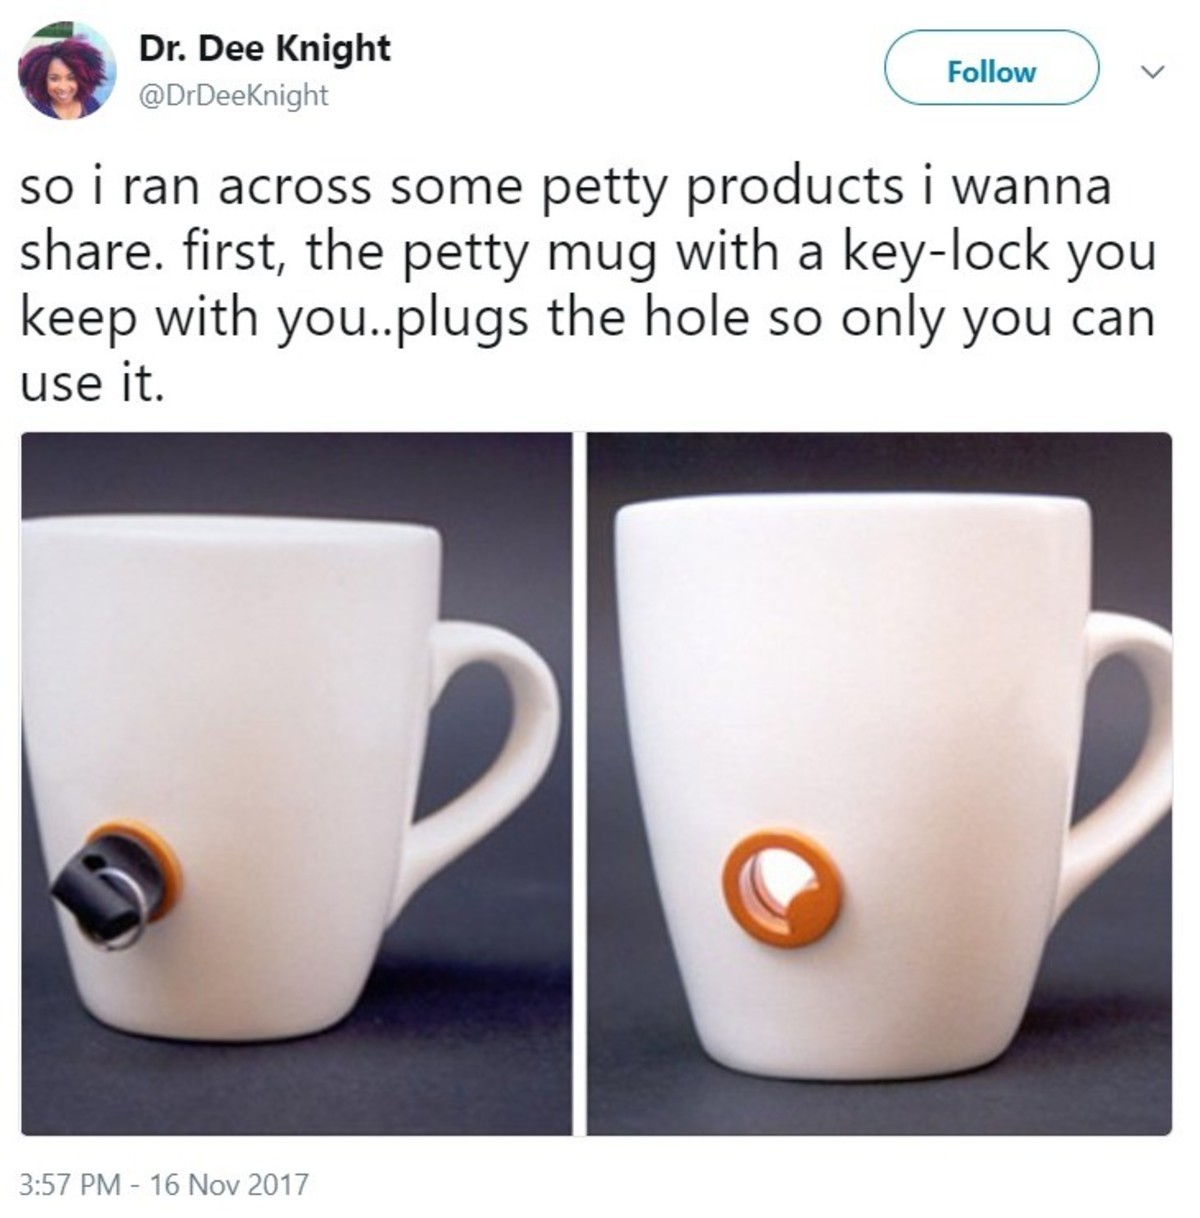 Hudasp Vinysha Reelfudec. ruffntuff. Dr. Dee Knight 'hot''' so i ran across some petty products i wanna share. first, the petty with a key/ -lock b/ keep with y